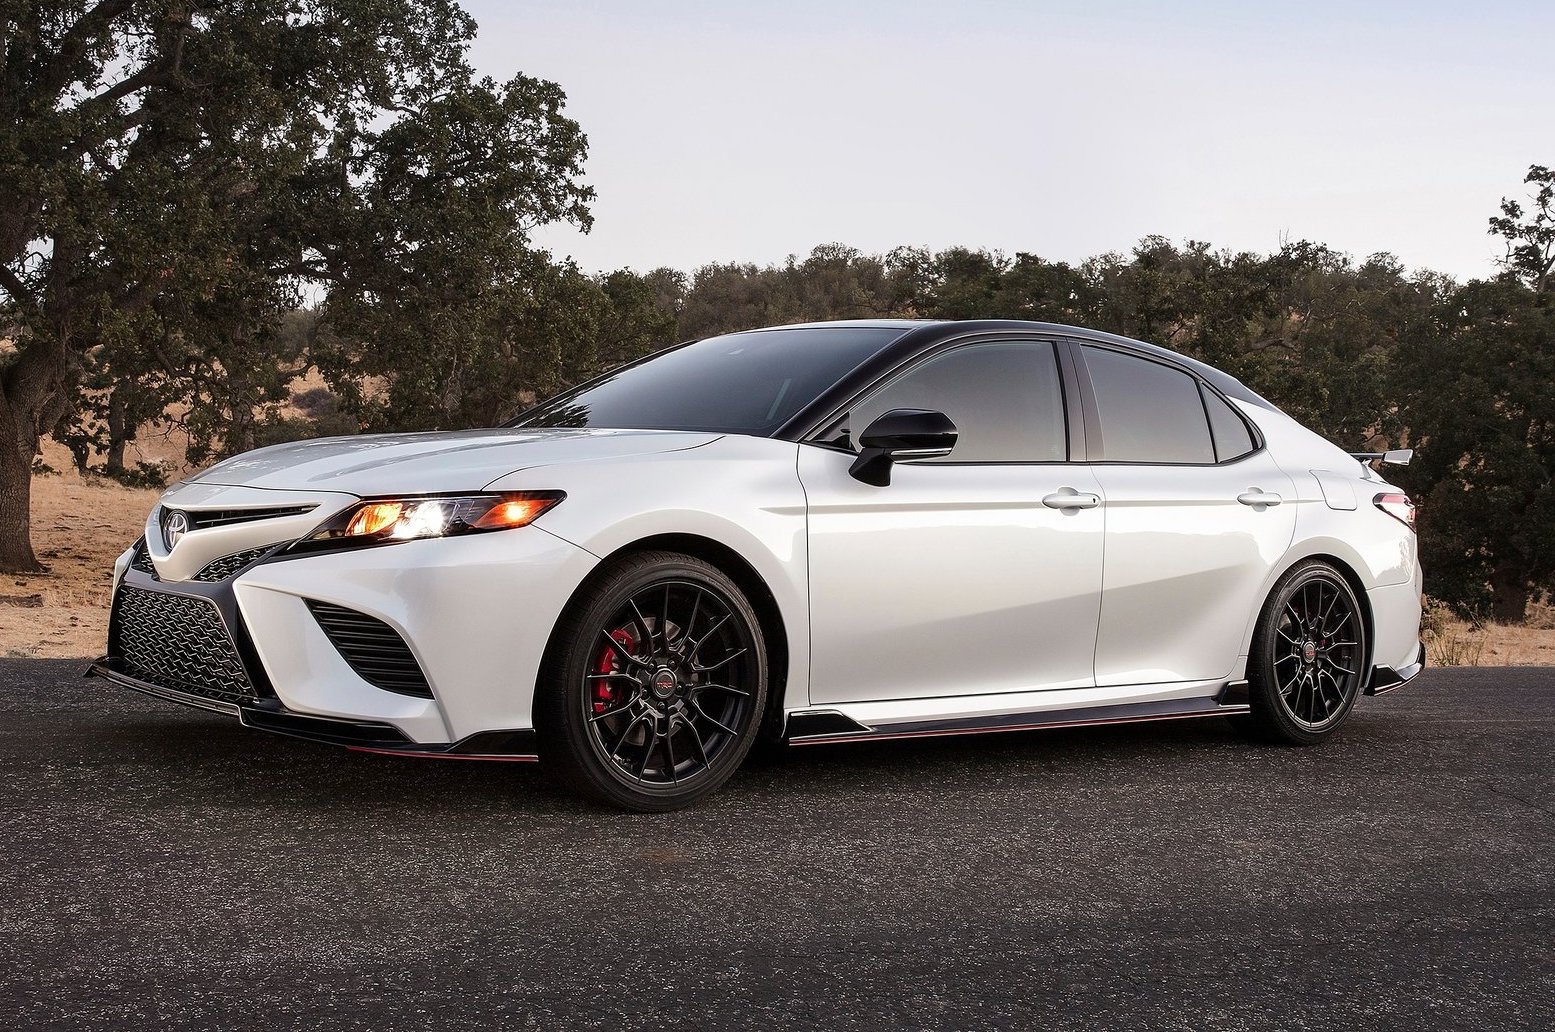 2020 Toyota Camry TRD shows racy appeal PerformanceDrive